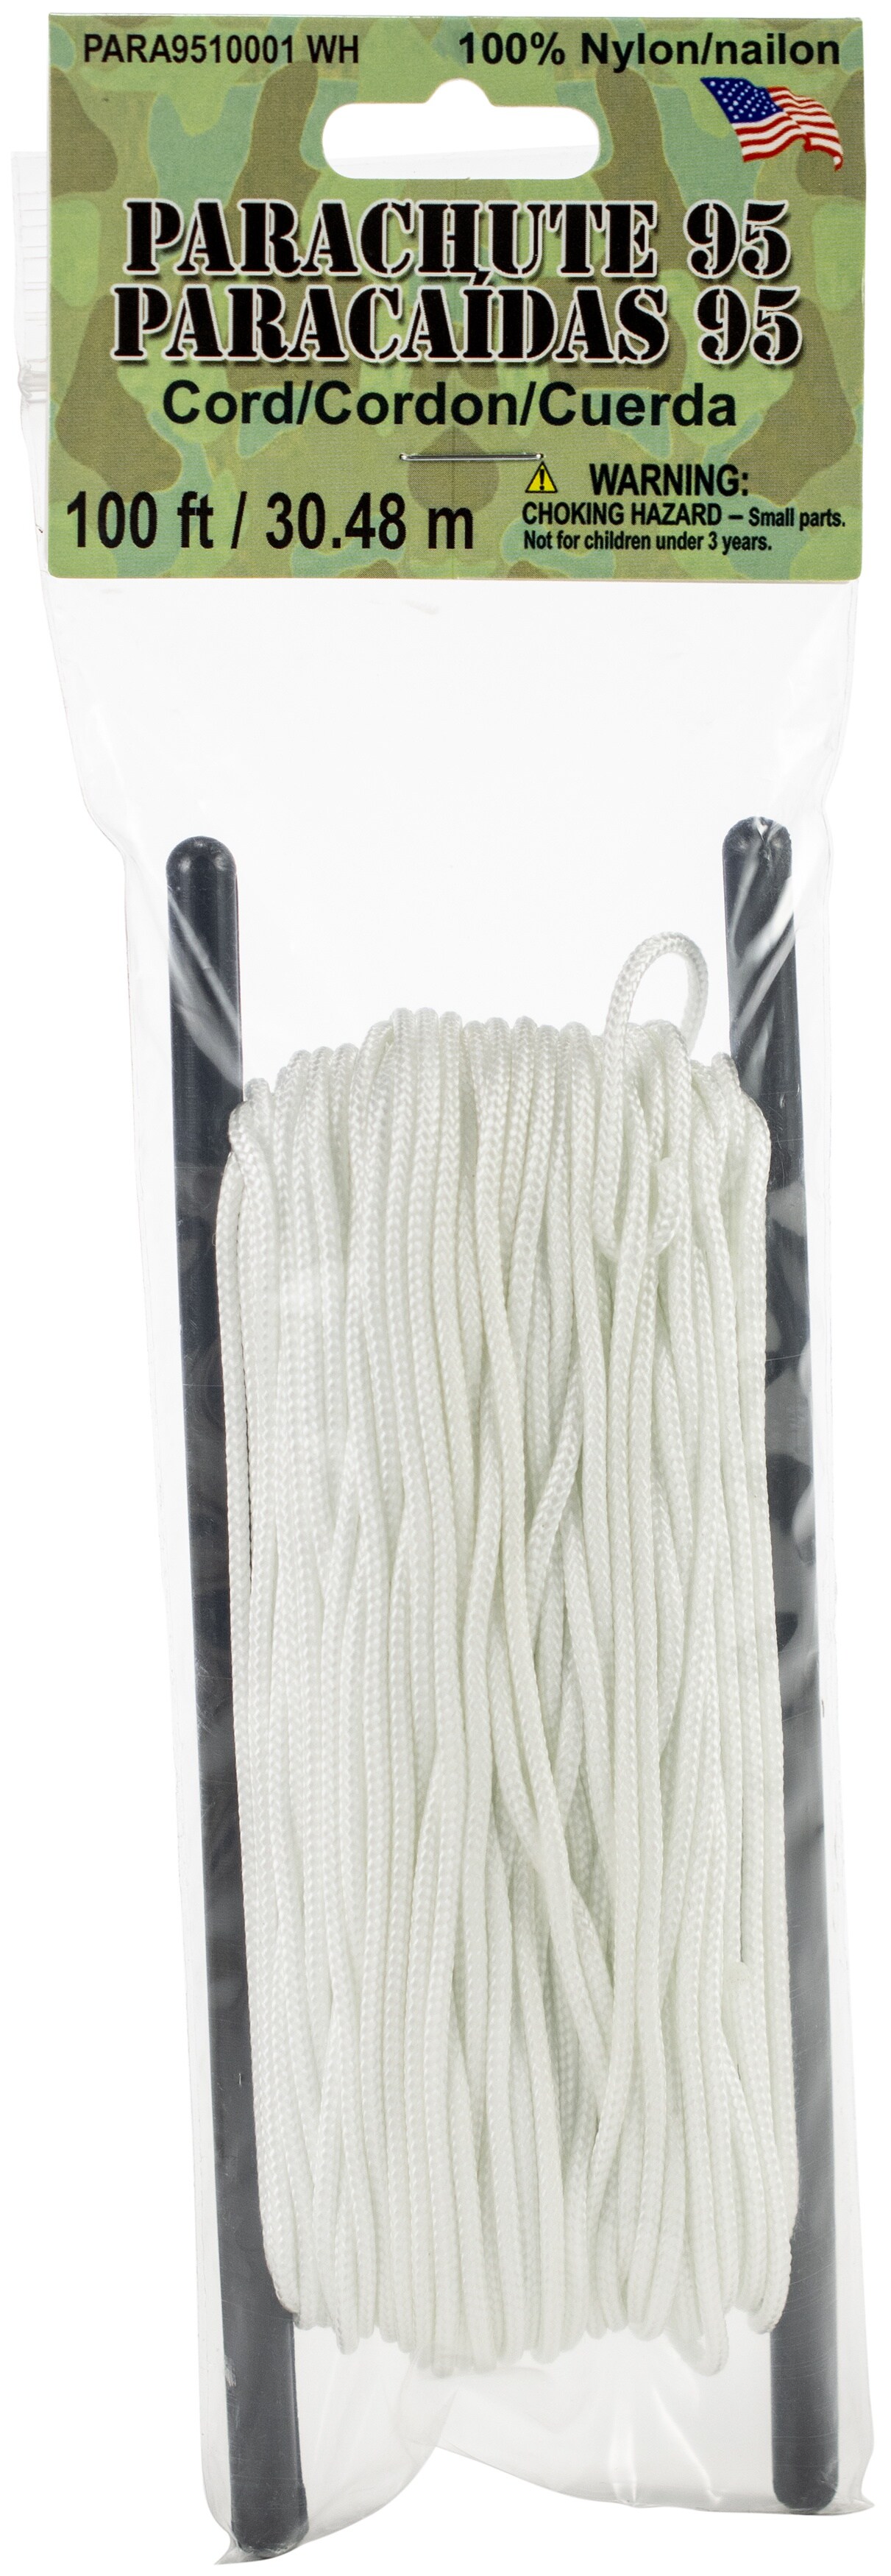 Parachute Cord Products - Pepperell Braiding Company